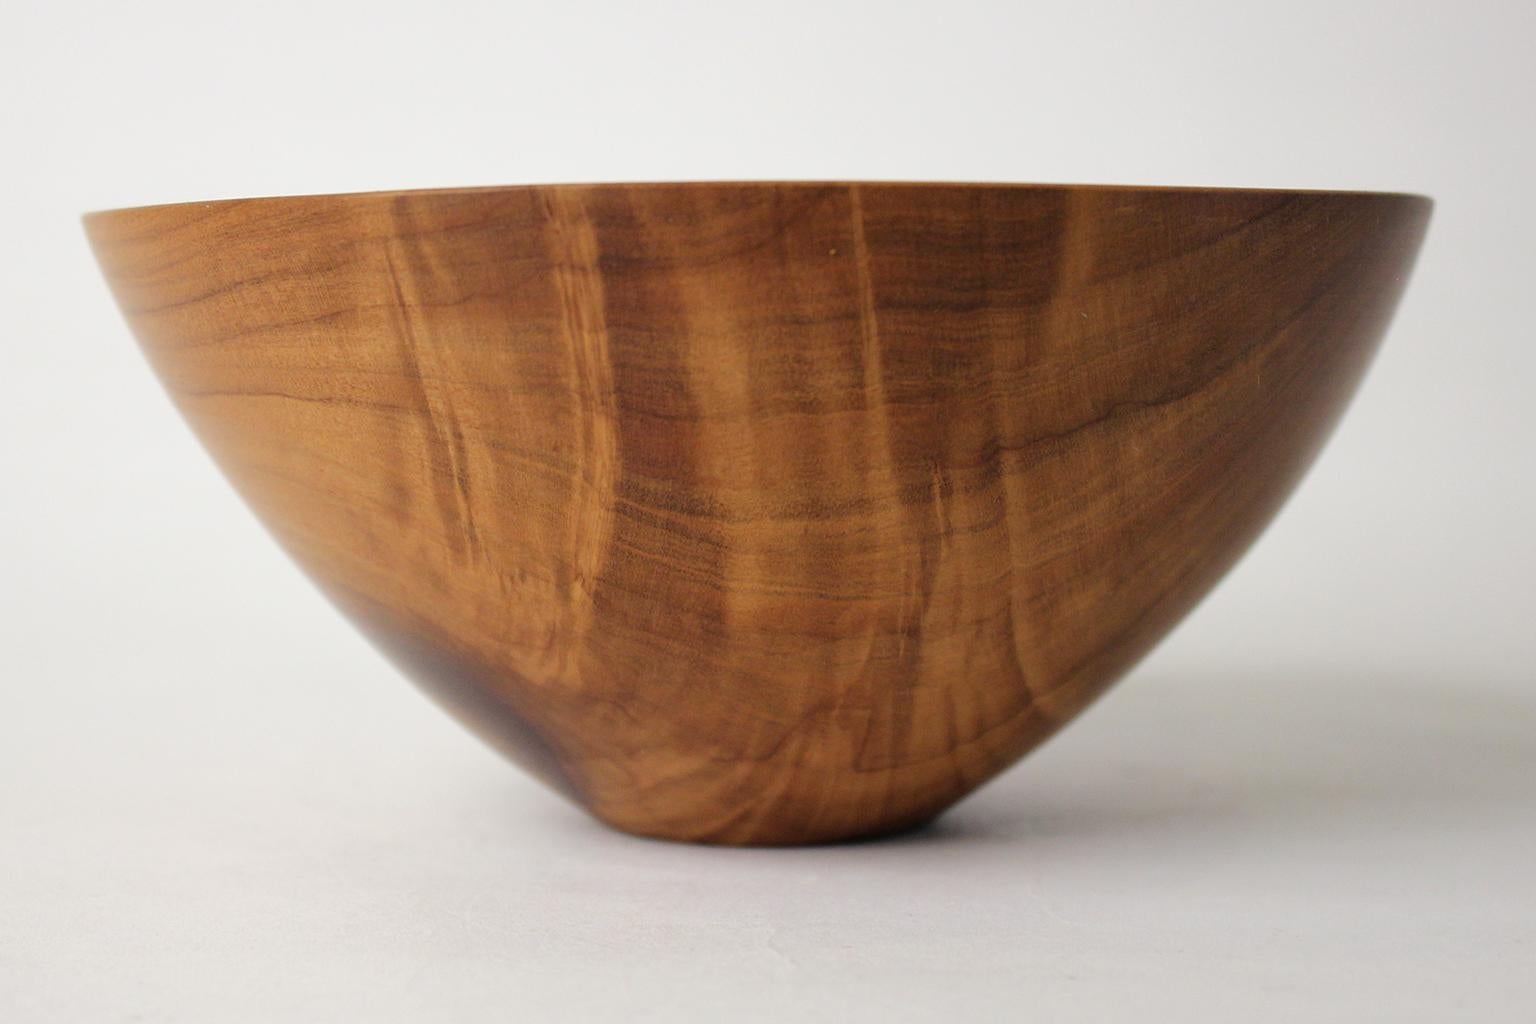 Great carved bowl by California Design artist, Bob Stocksdale. Signed on the bottom bye the artist. Made from Olive wood from Italy. Great design and form. In excellent shape. Measures 3